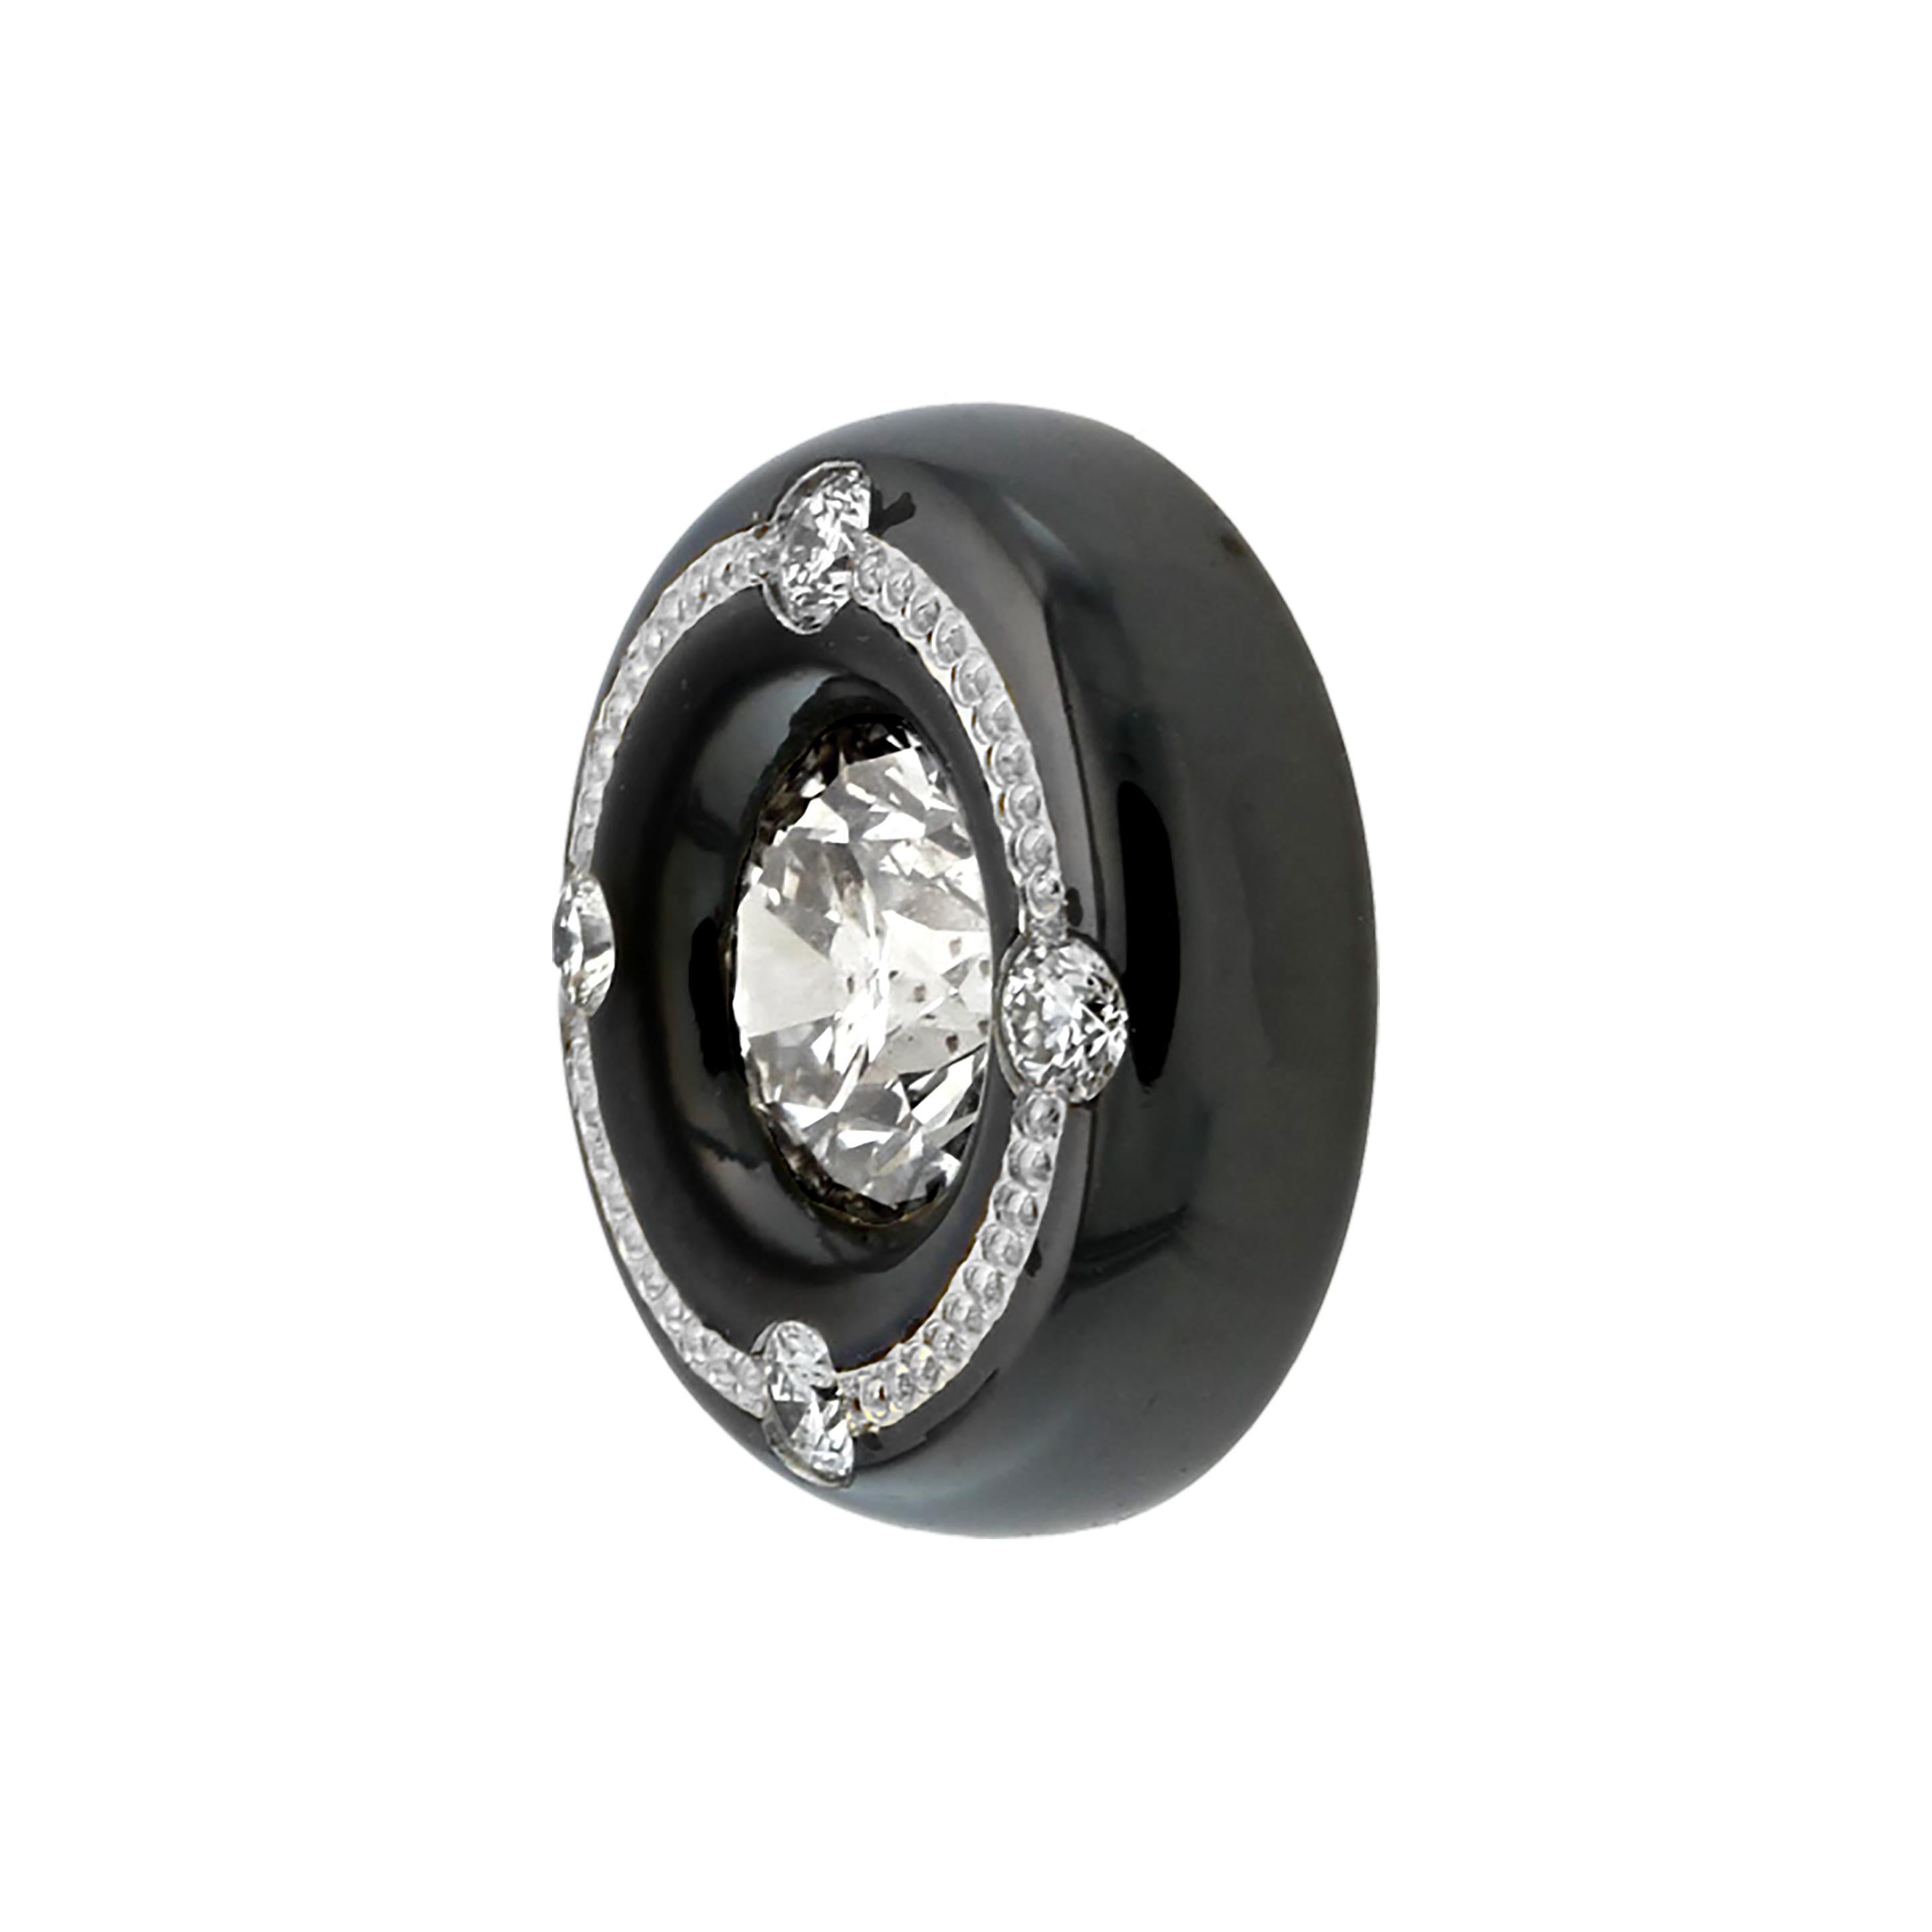 Not your basic diamond stud earrings! These diamonds are set in a round high gloss black Knightsteel setting with a line of pure platinum hand engraved shaped inlay going around the top. There are also four .01 ct. round brilliant diamonds bead set